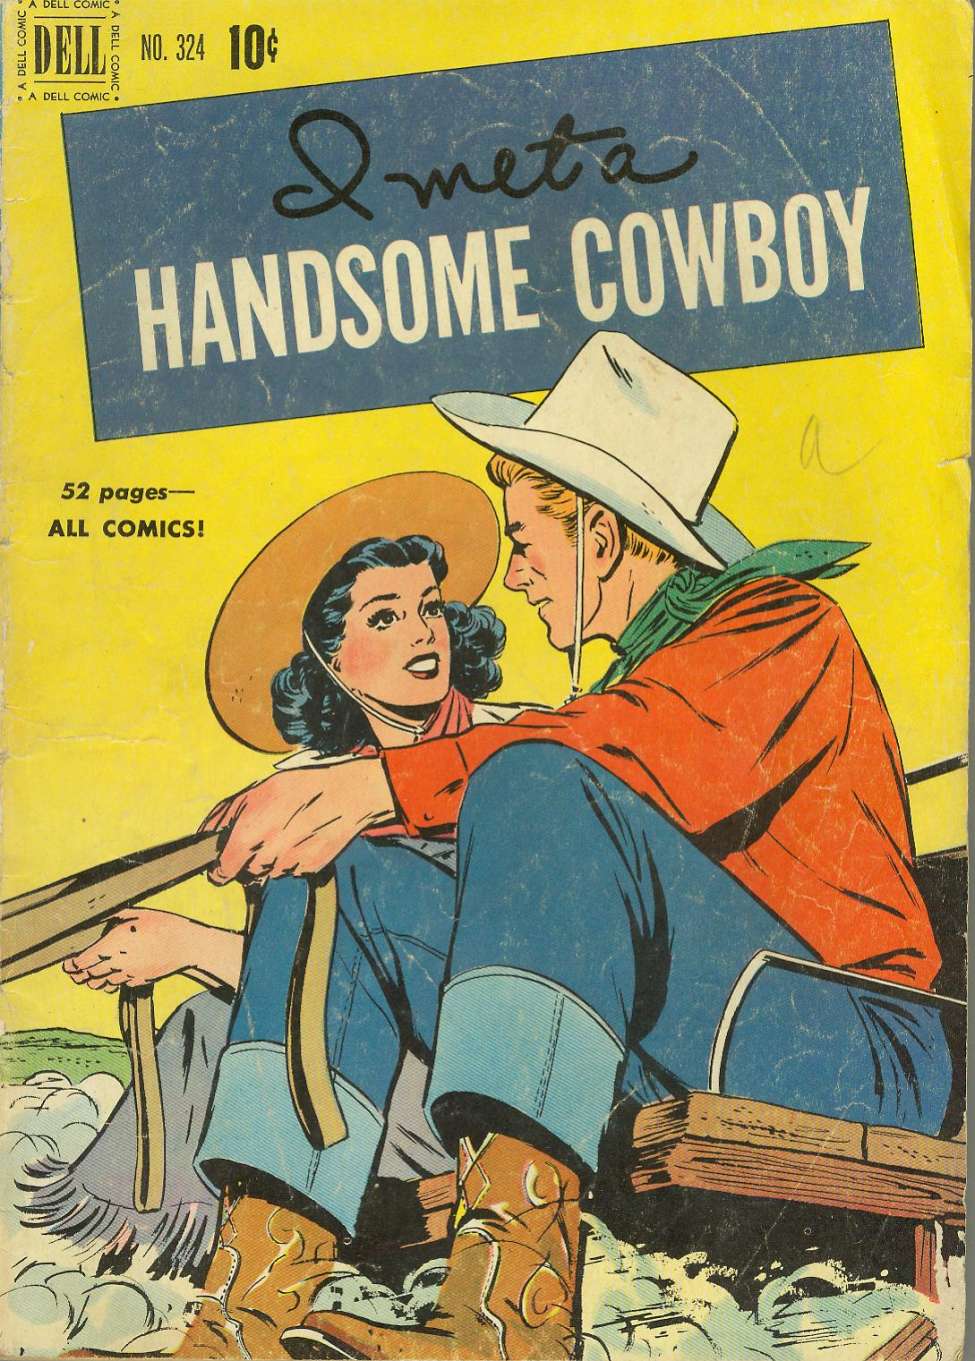 Book Cover For 0324 - I Met a Handsome Cowboy